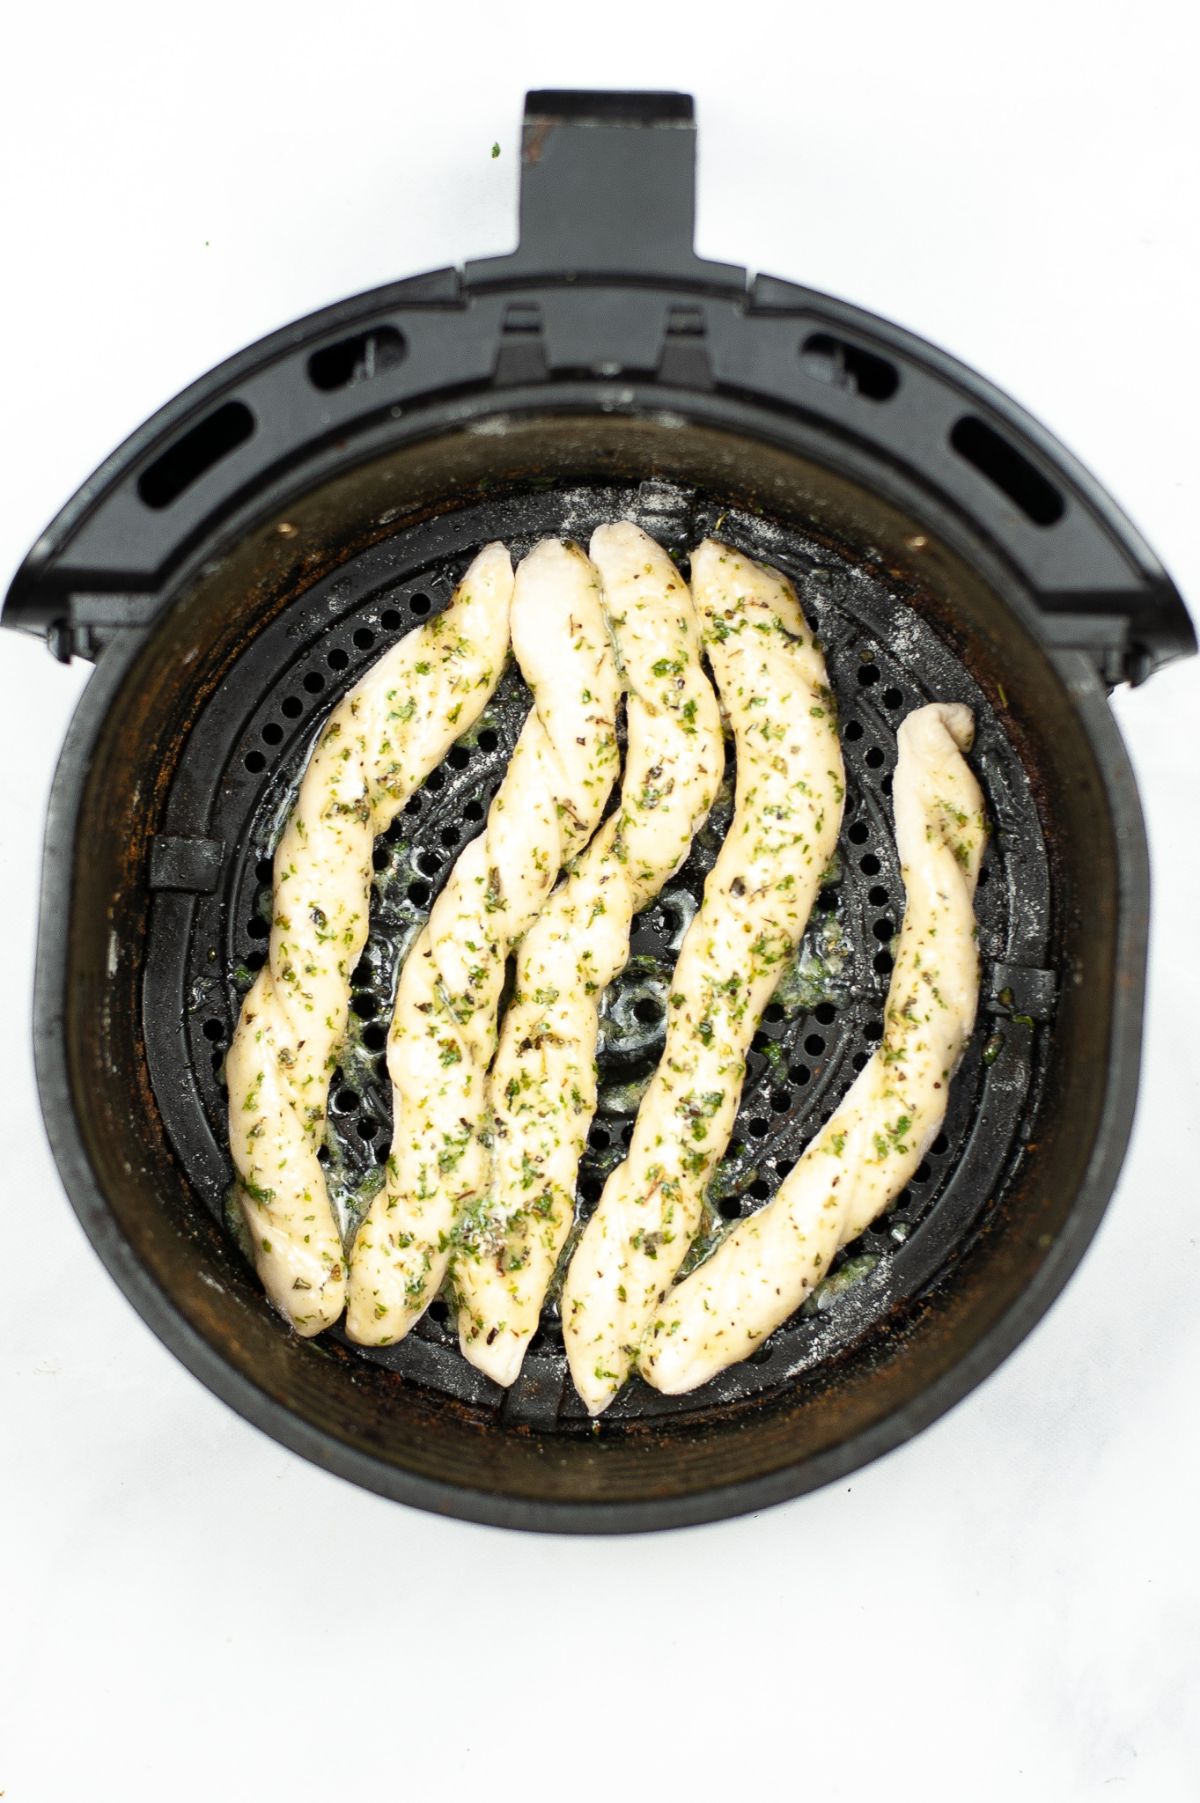 Breadsticks inside the air fryer before being cooked